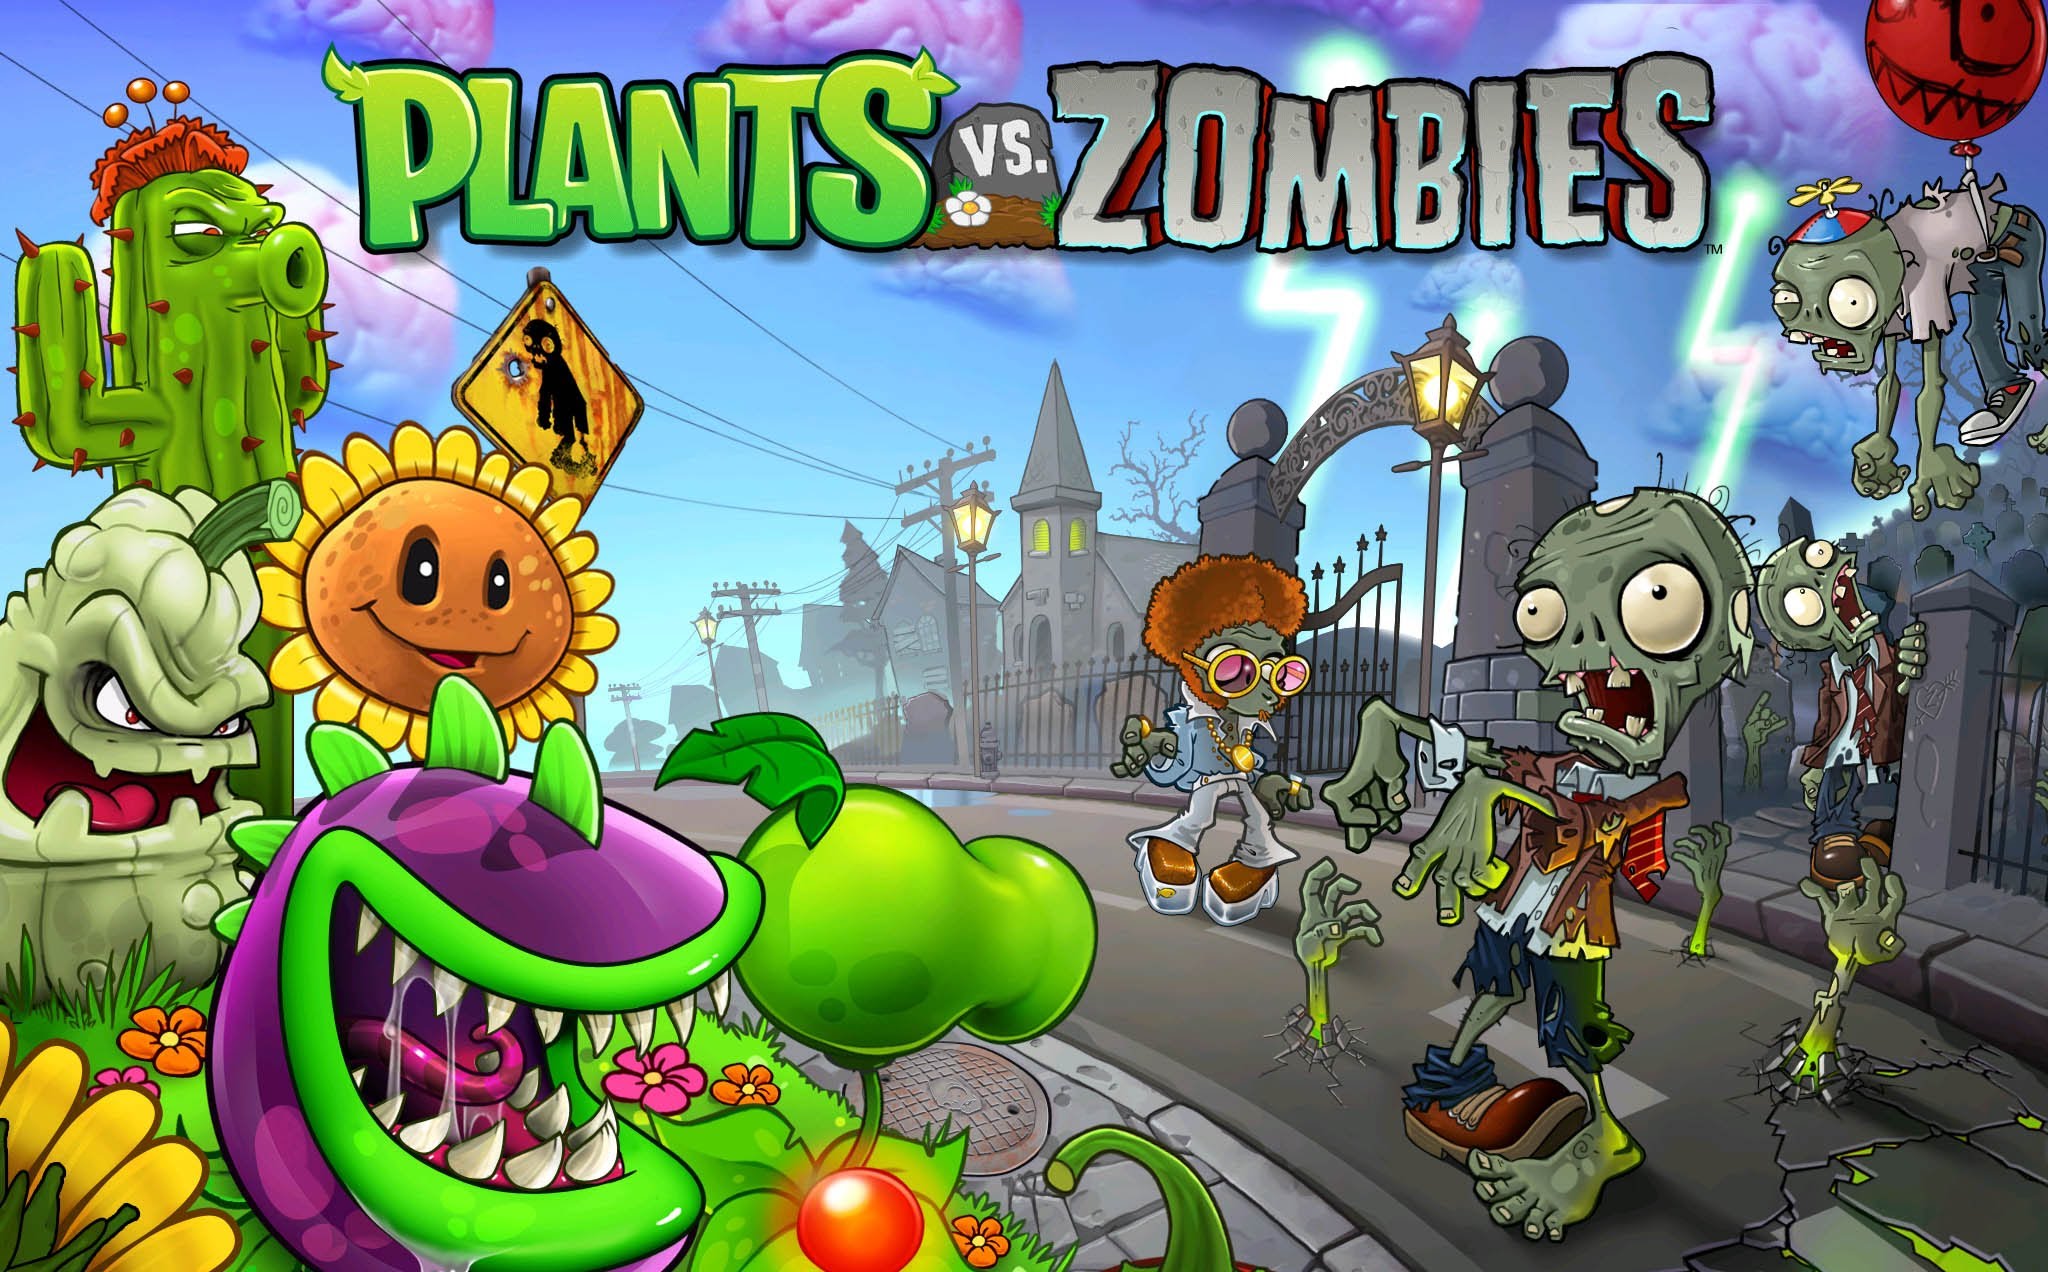 Top 6 Plants vs Zombies Videos for Learning Tricks